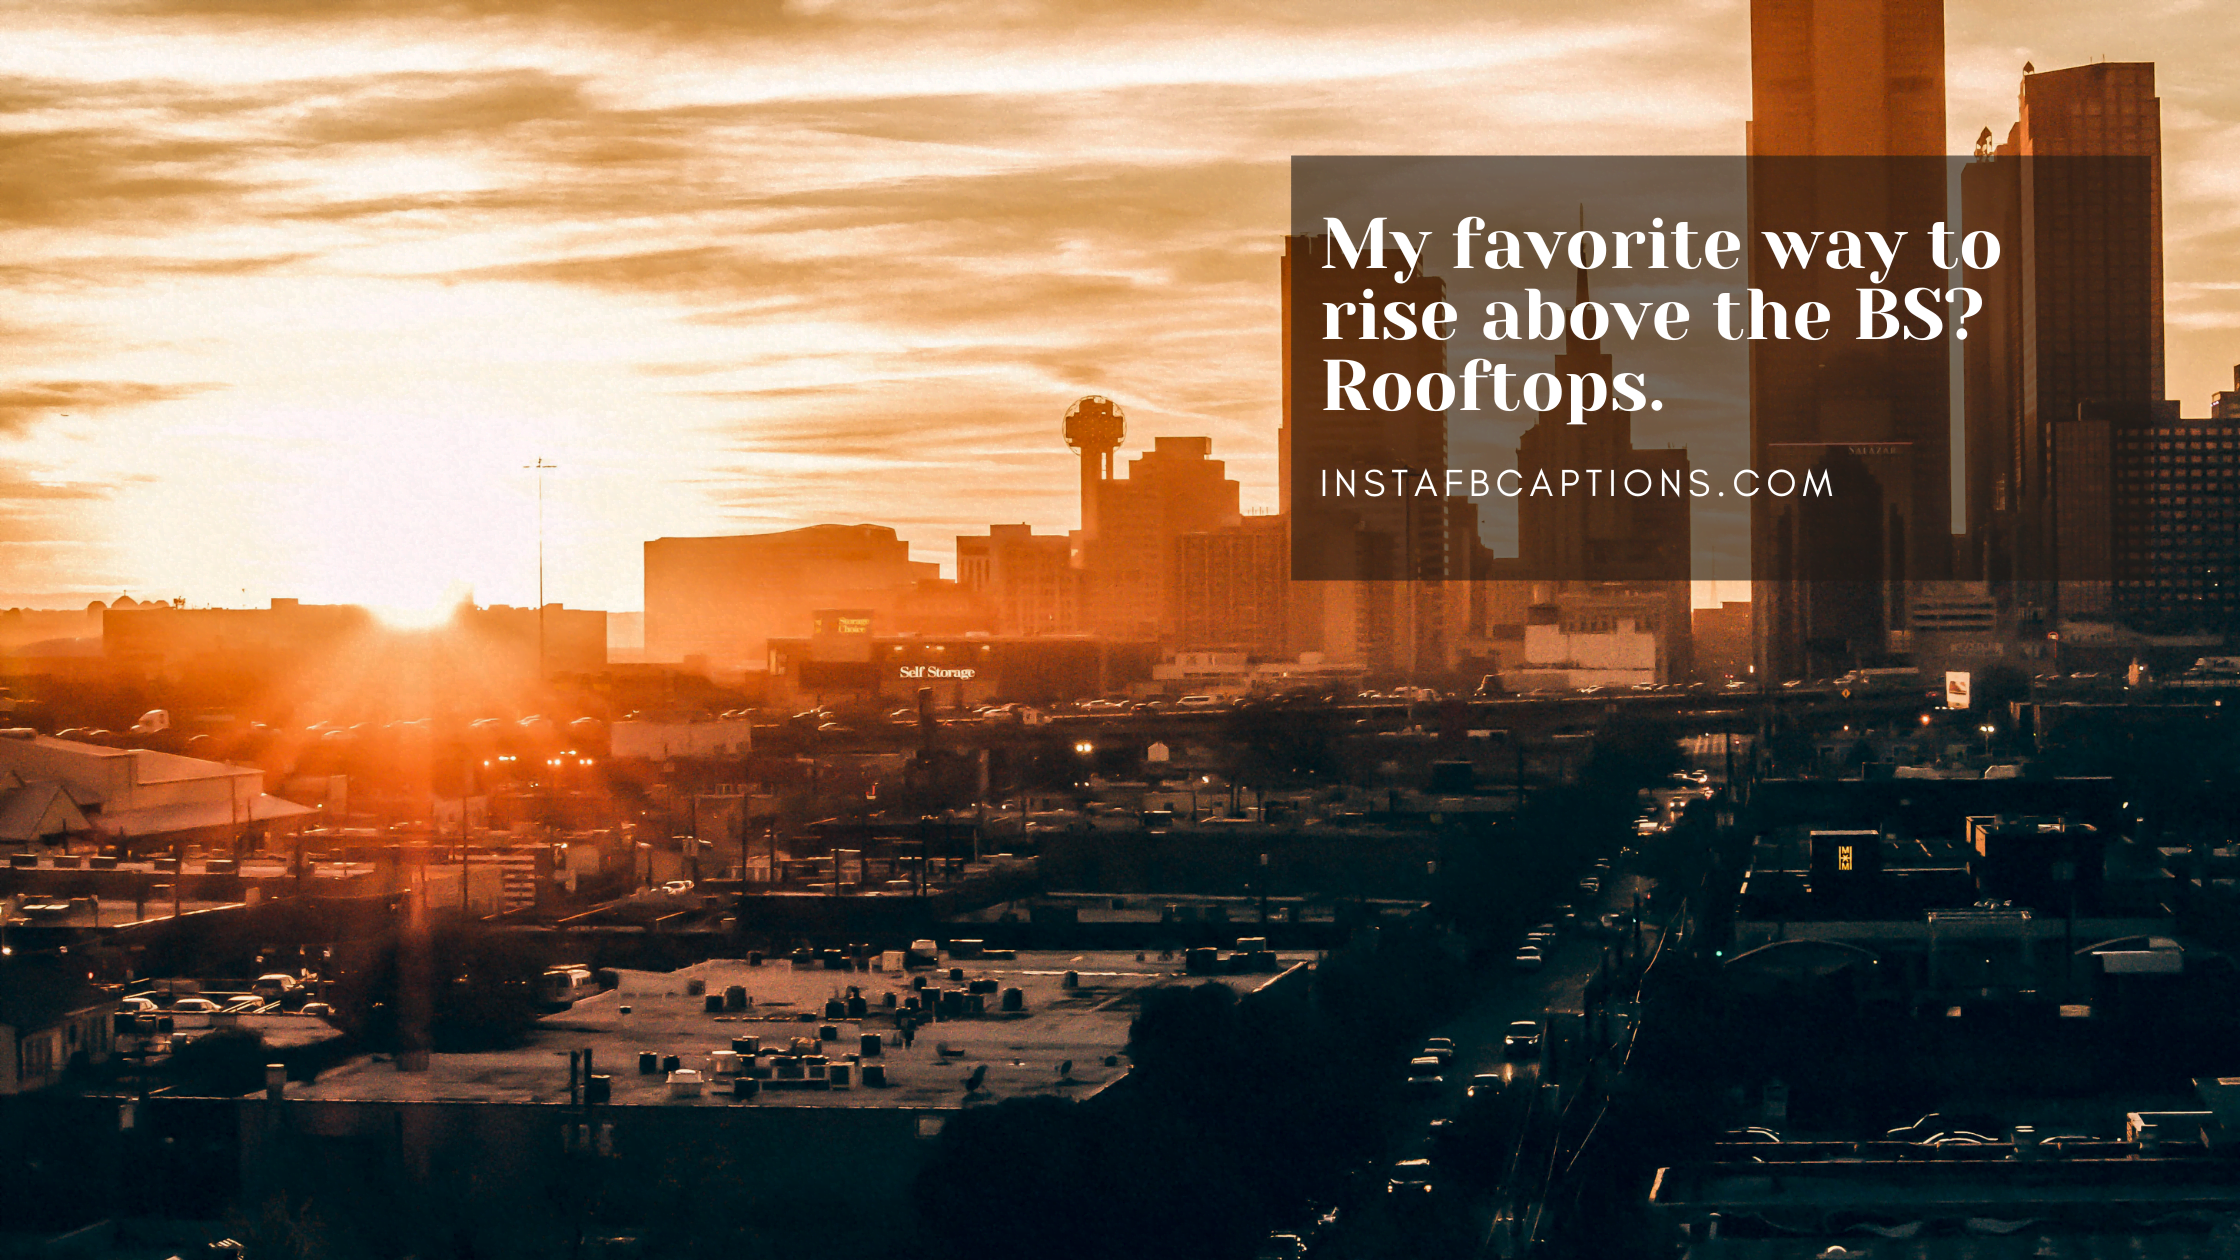 Funny Rooftop Captions  - Funny Rooftop Captions - 99 Rooftop Instagram Captions for Height View in 2022